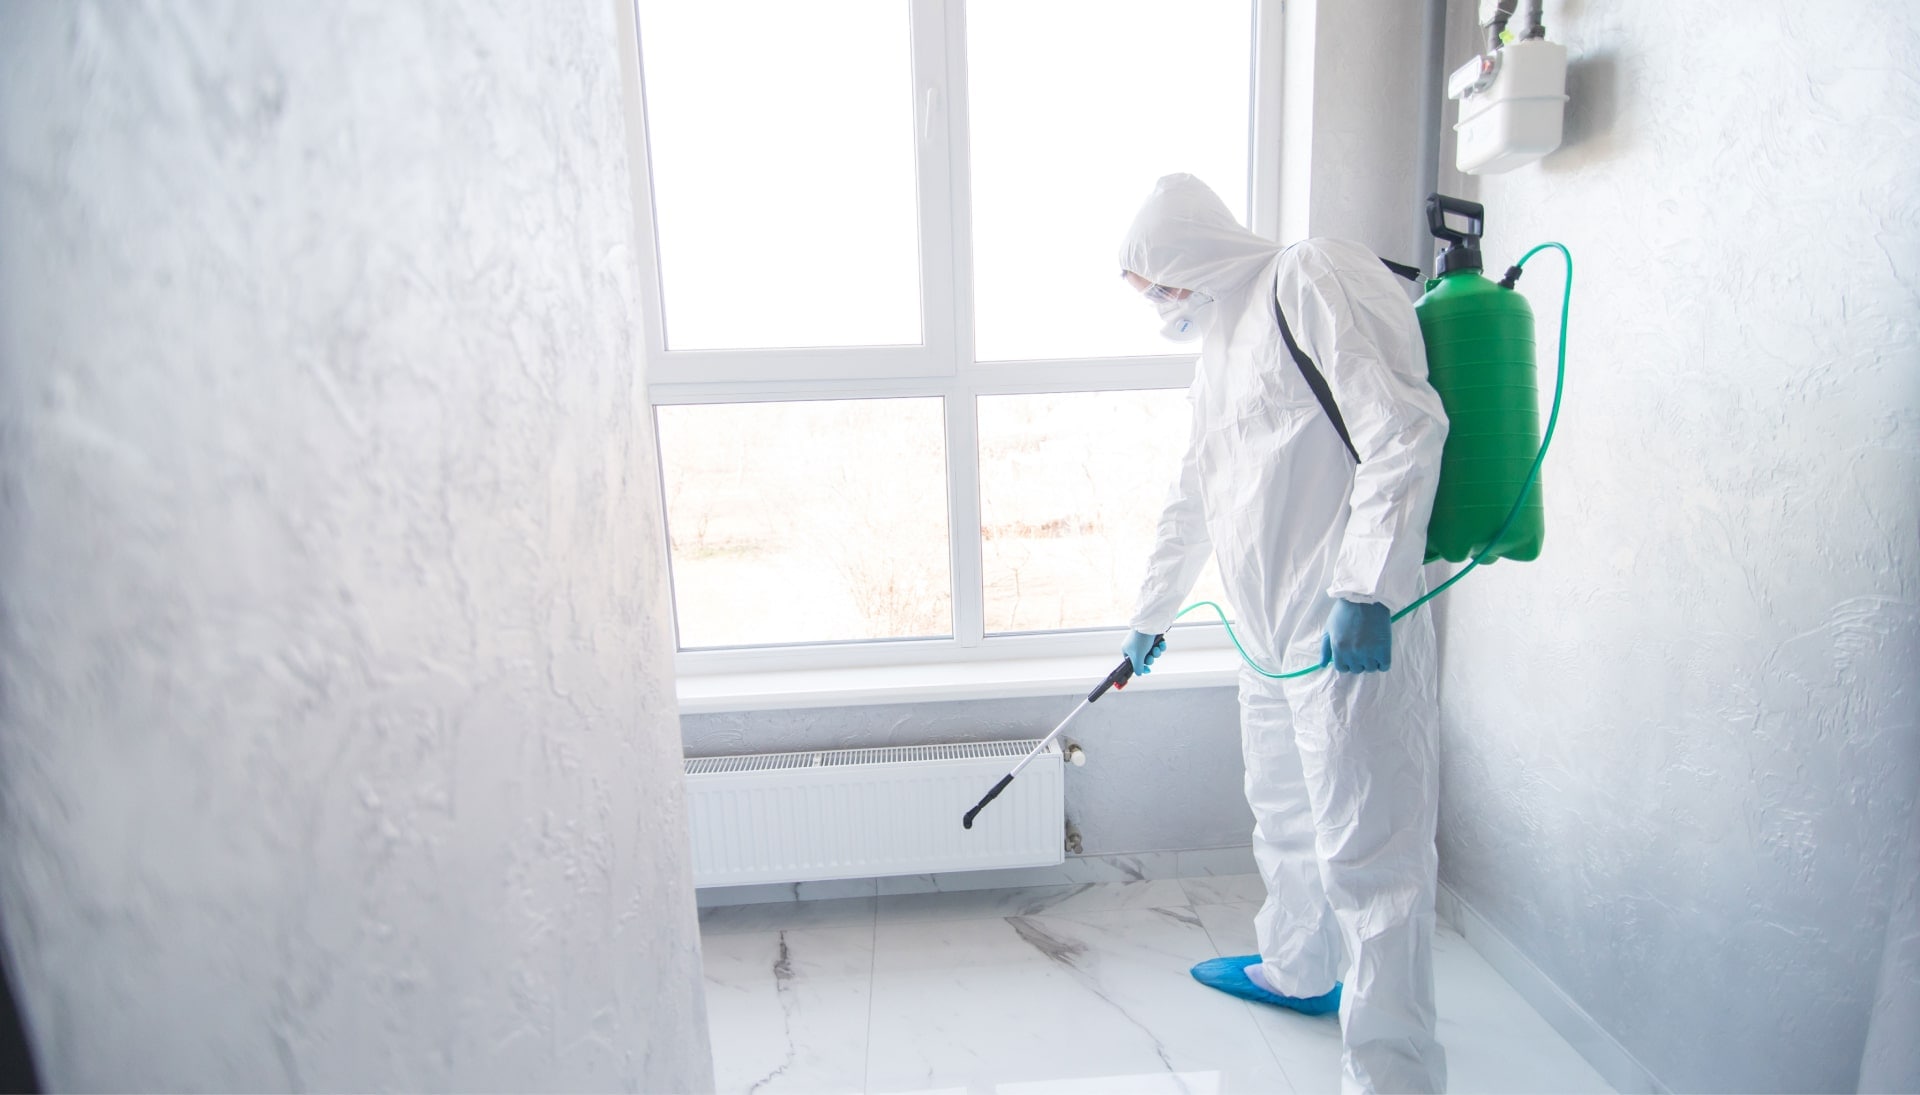 We provide the highest-quality mold inspection, testing, and removal services in the Pittsburgh, Pennsylvania area.